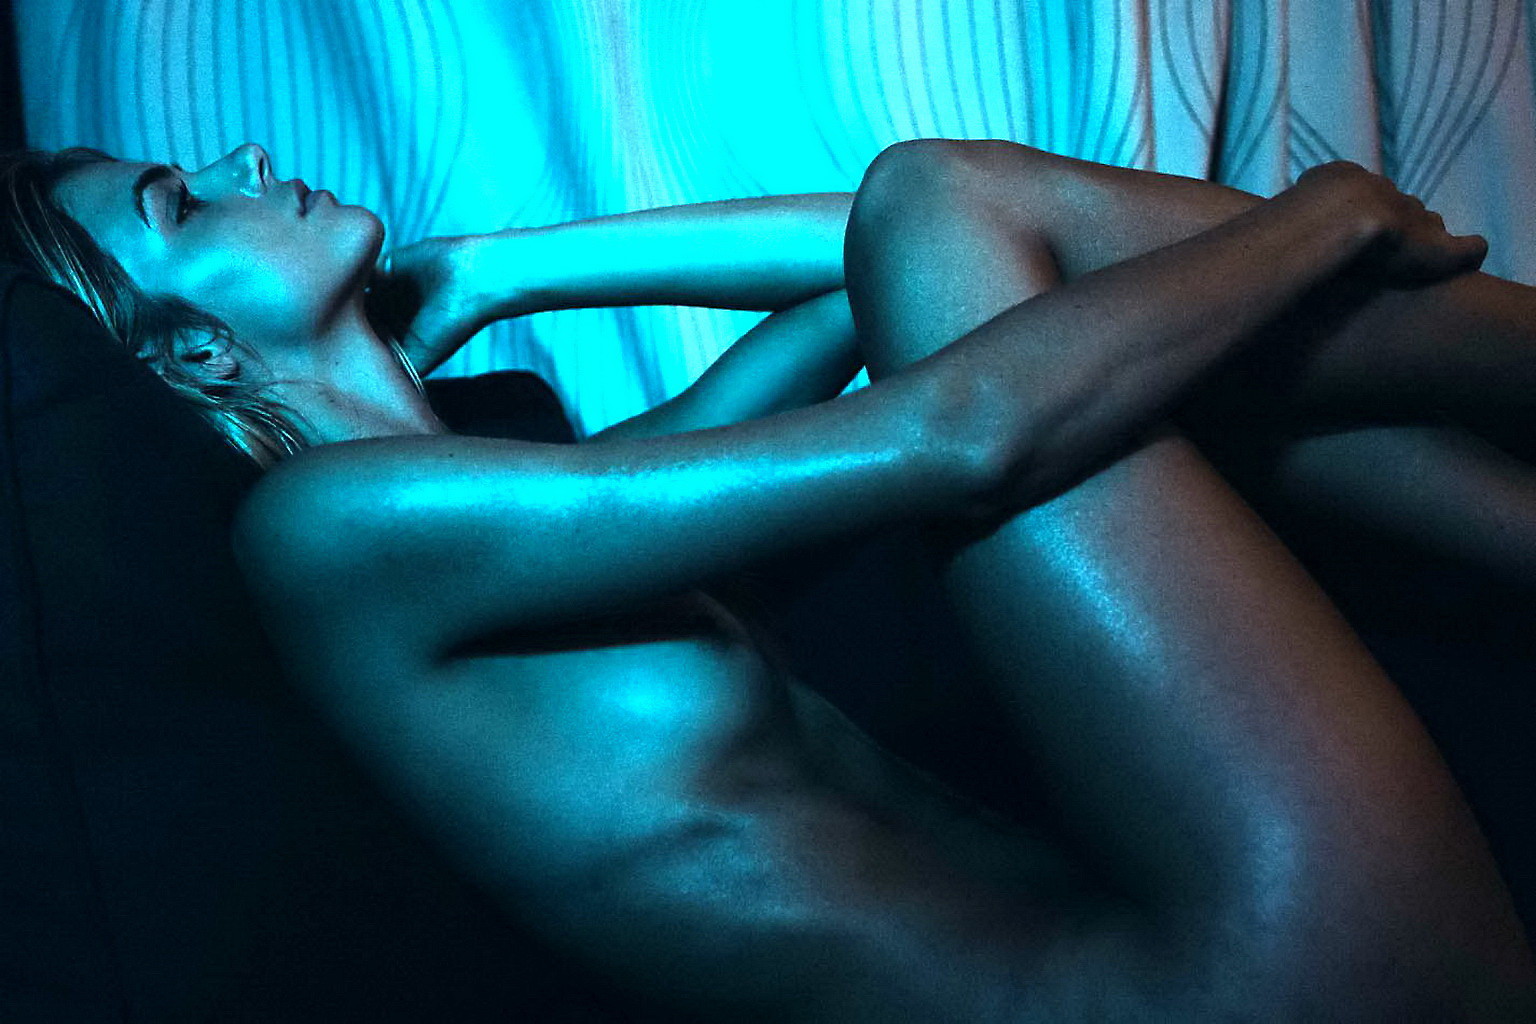 Chantal Jones nude photoshoot from America's Next Top Model - Cycle 9 #75248653